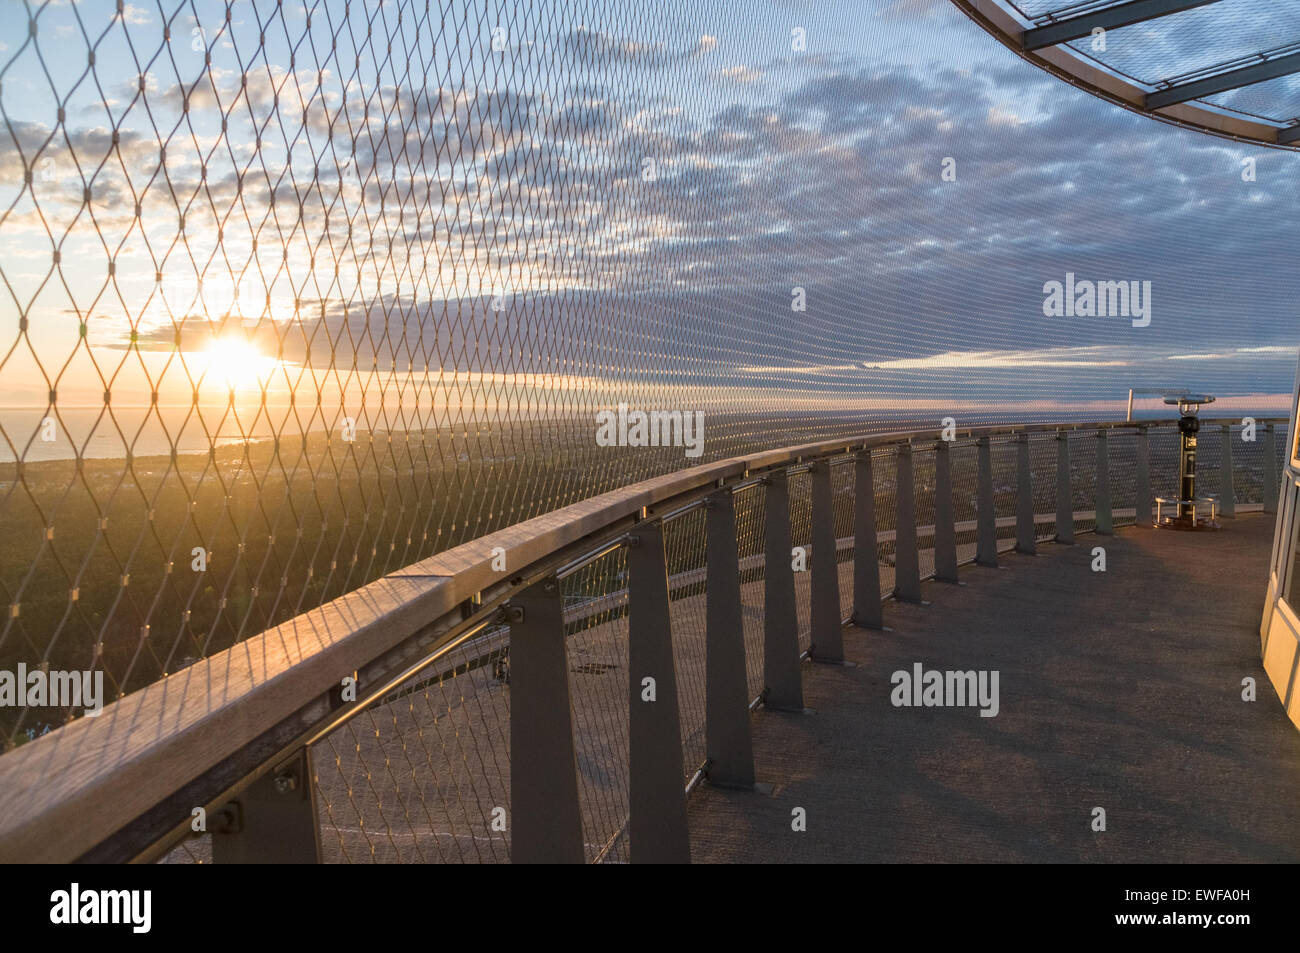 Coin operated panoramic telescope on TV tower, sunset view Stock Photo